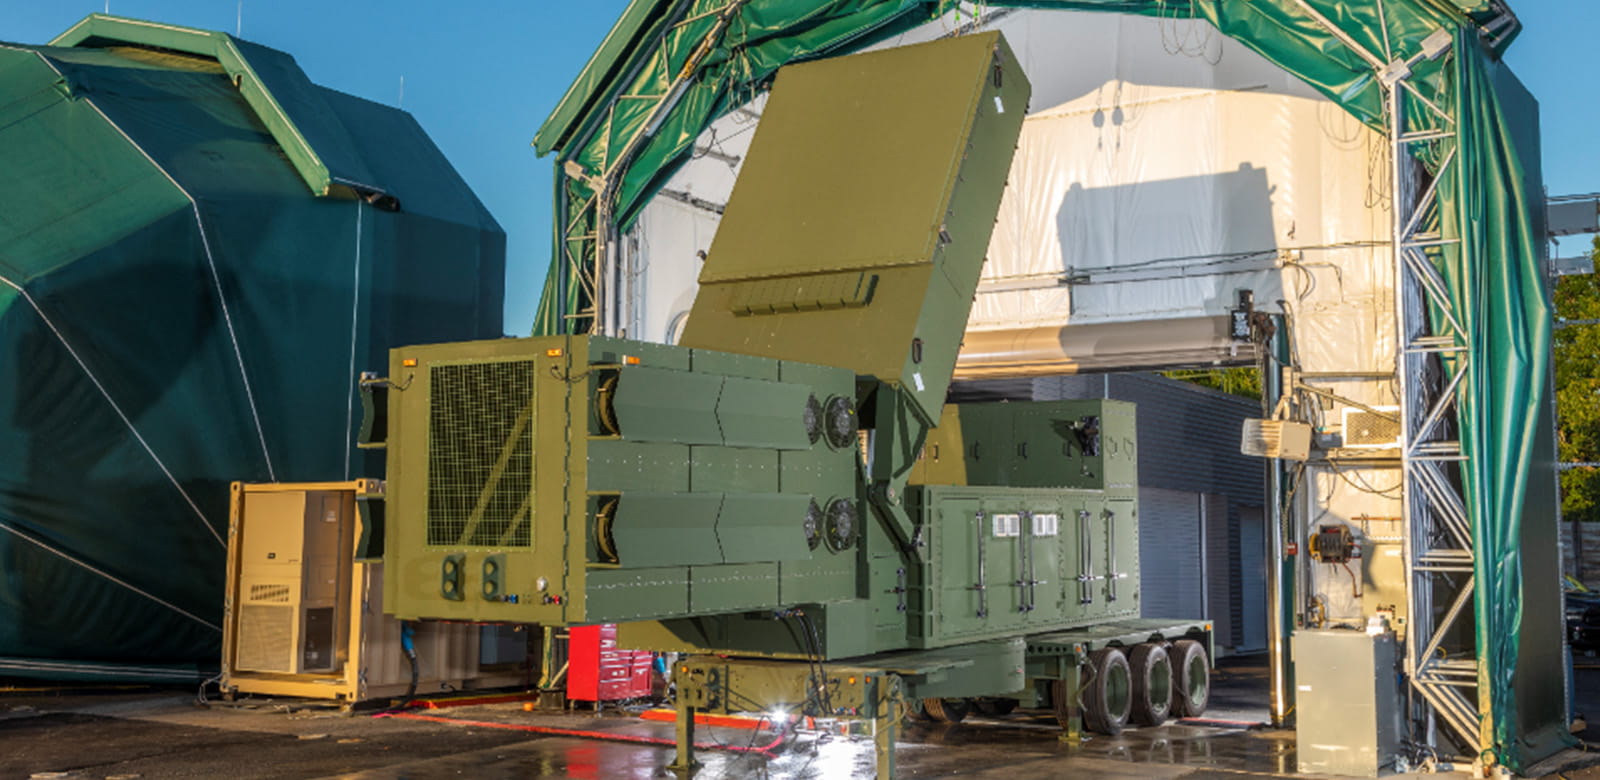 Raytheon’s GhostEye, the first of a family of radars, otherwise known as LTAMDS, is currently sensing at the Raytheon Missiles & Defense outdoor test facility.